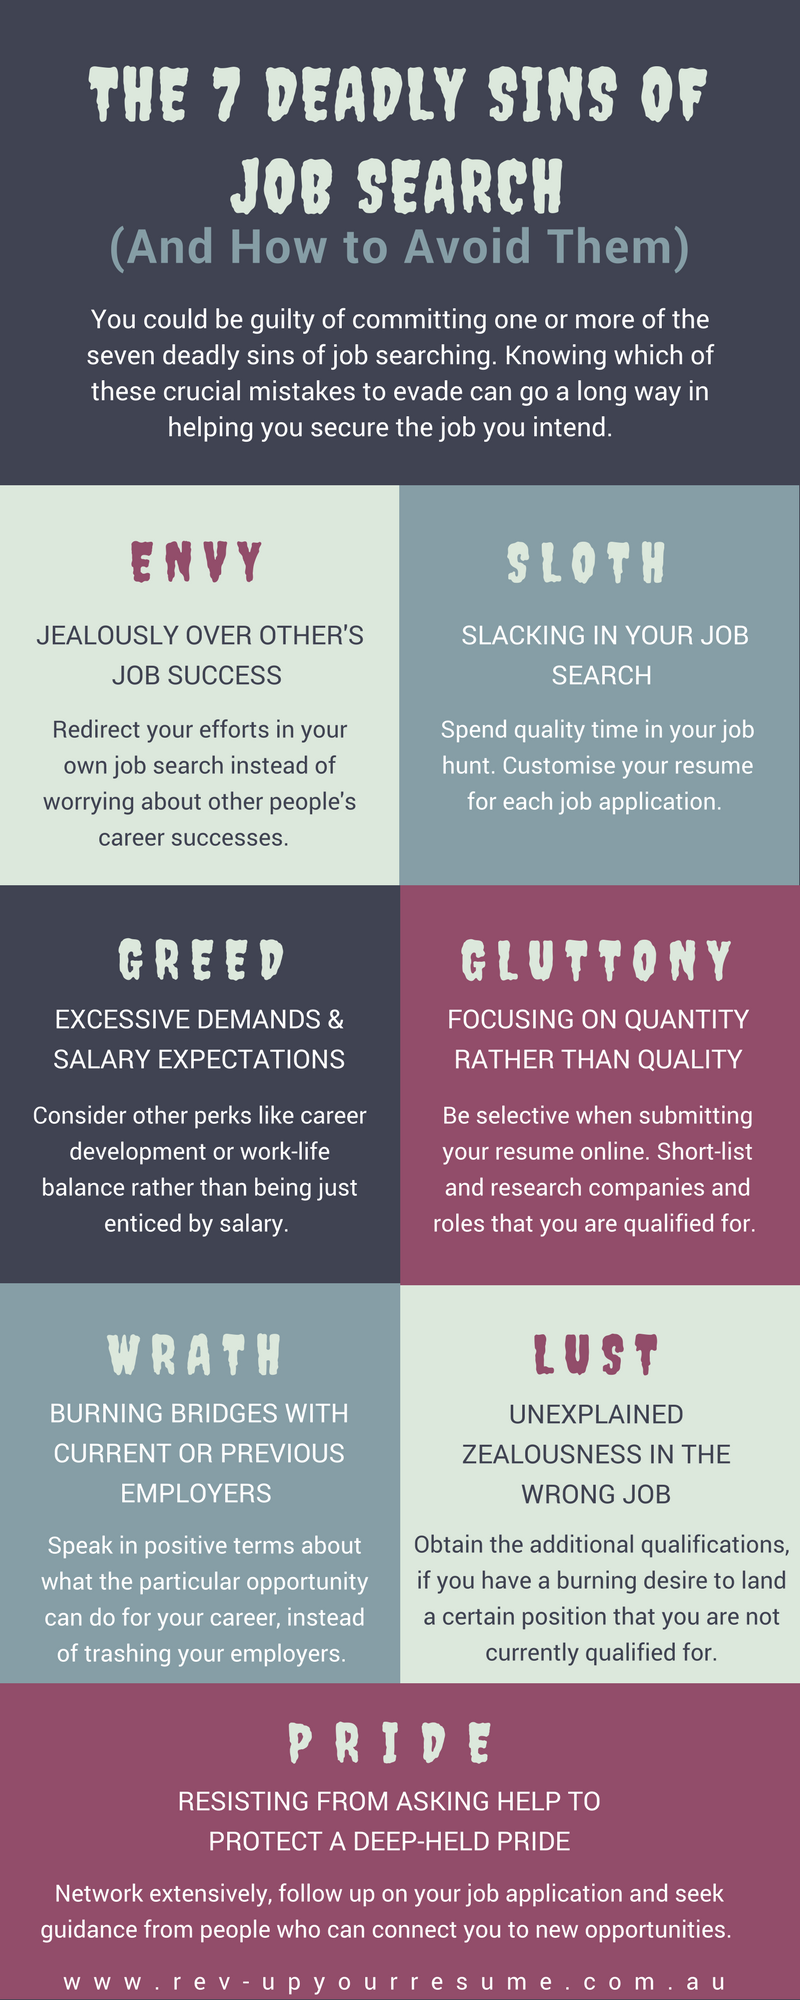 The 7 Deadly Sins of Job Search and How to Avoid Them